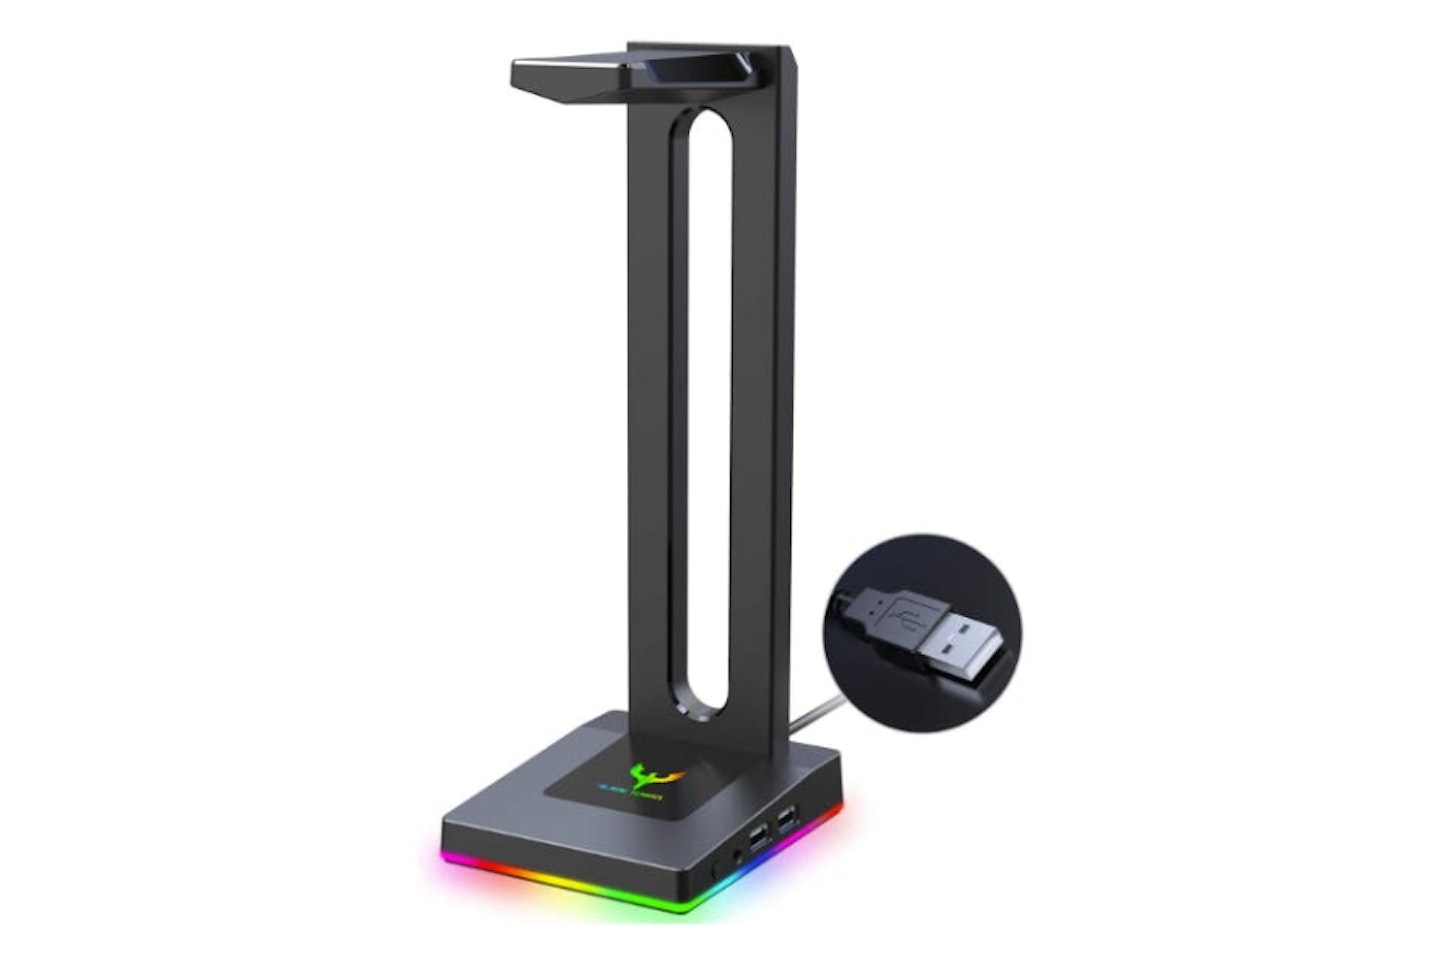 Blade Hawks RGB Gaming Headset Stand - one of the best PC gaming accessories